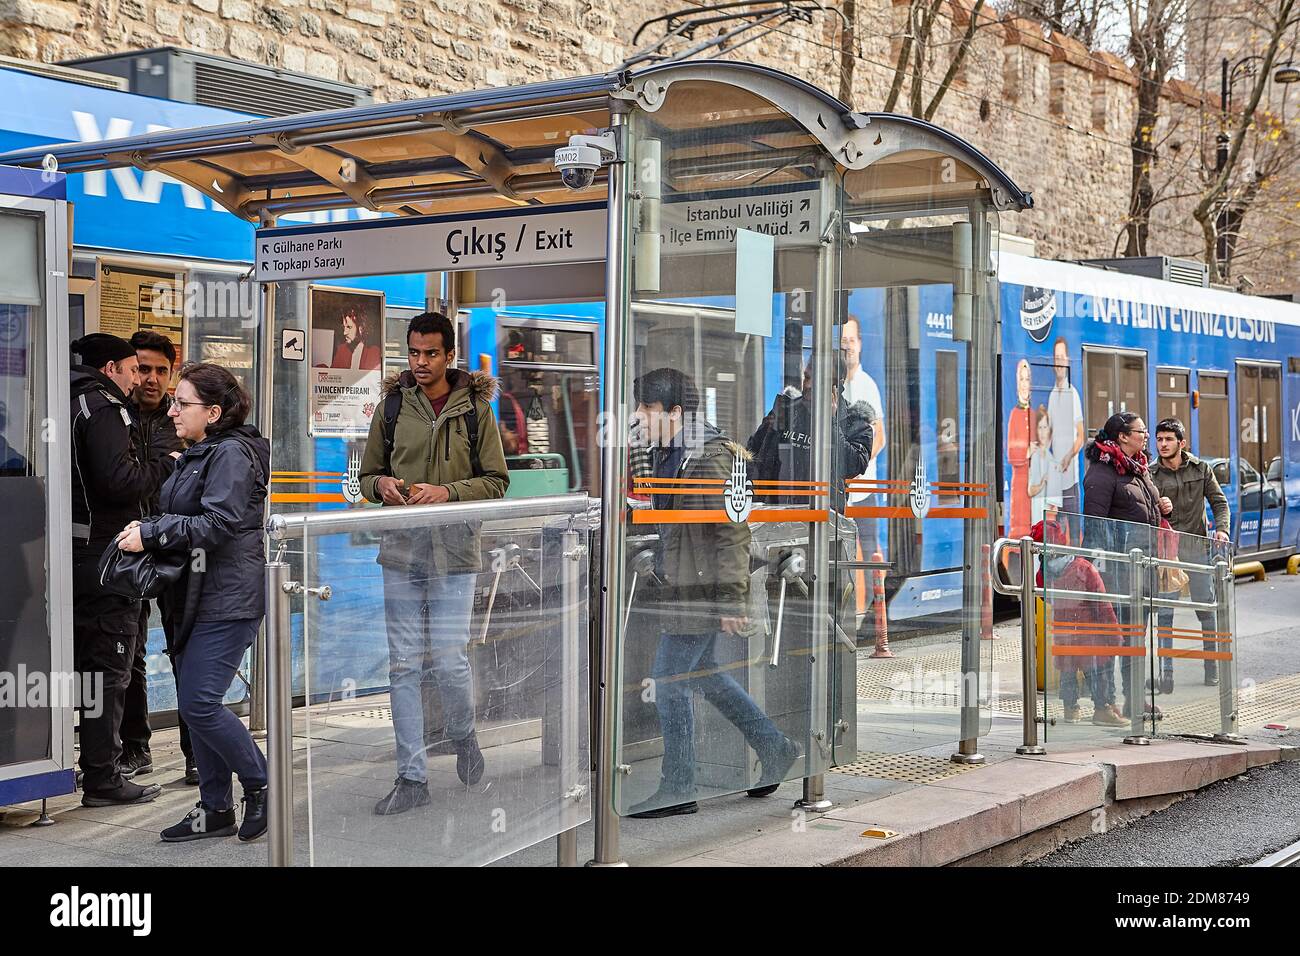 Turnstile exit from the station of the modern low-floor tram, Fatih, Istanbul, Turkey. Stock Photo